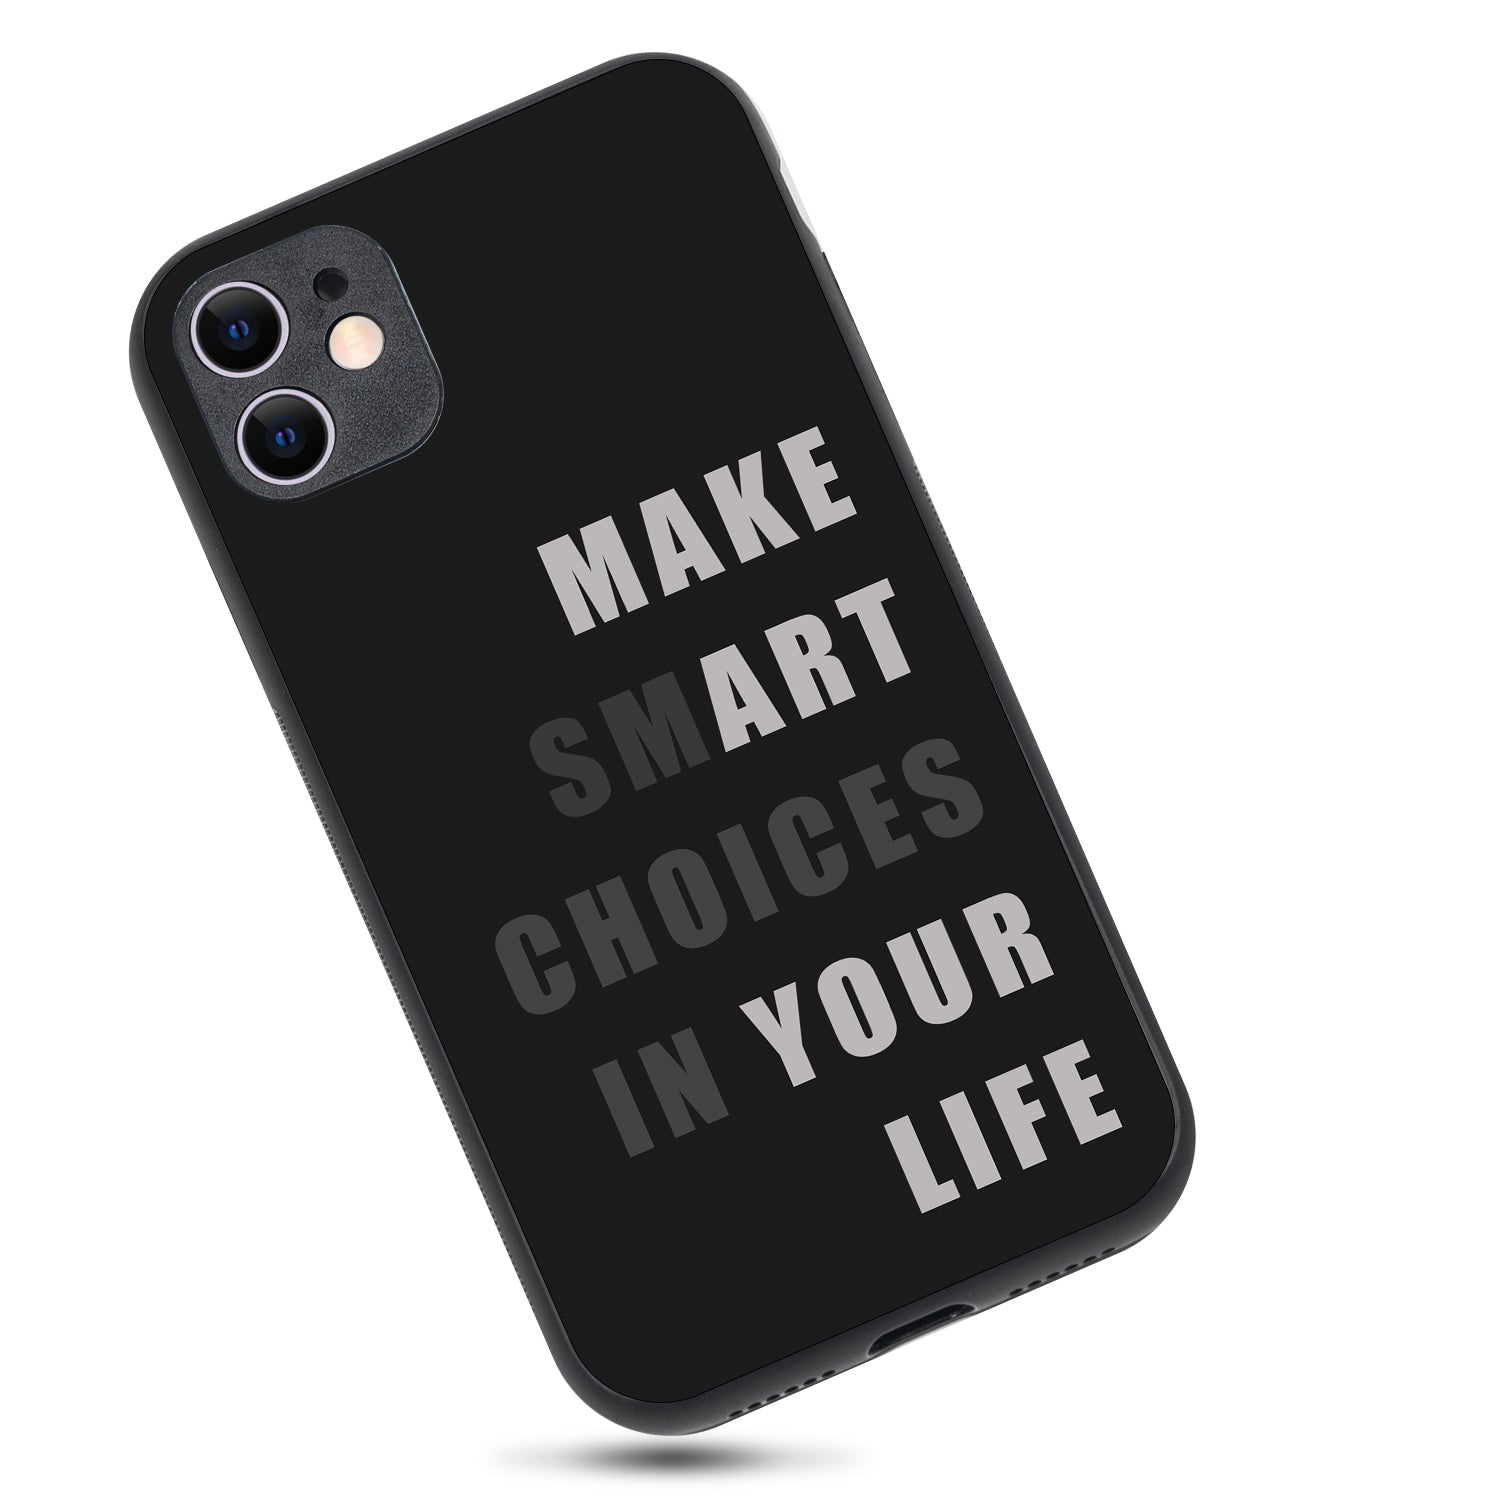 Smart Choices Motivational Quotes iPhone 11 Case